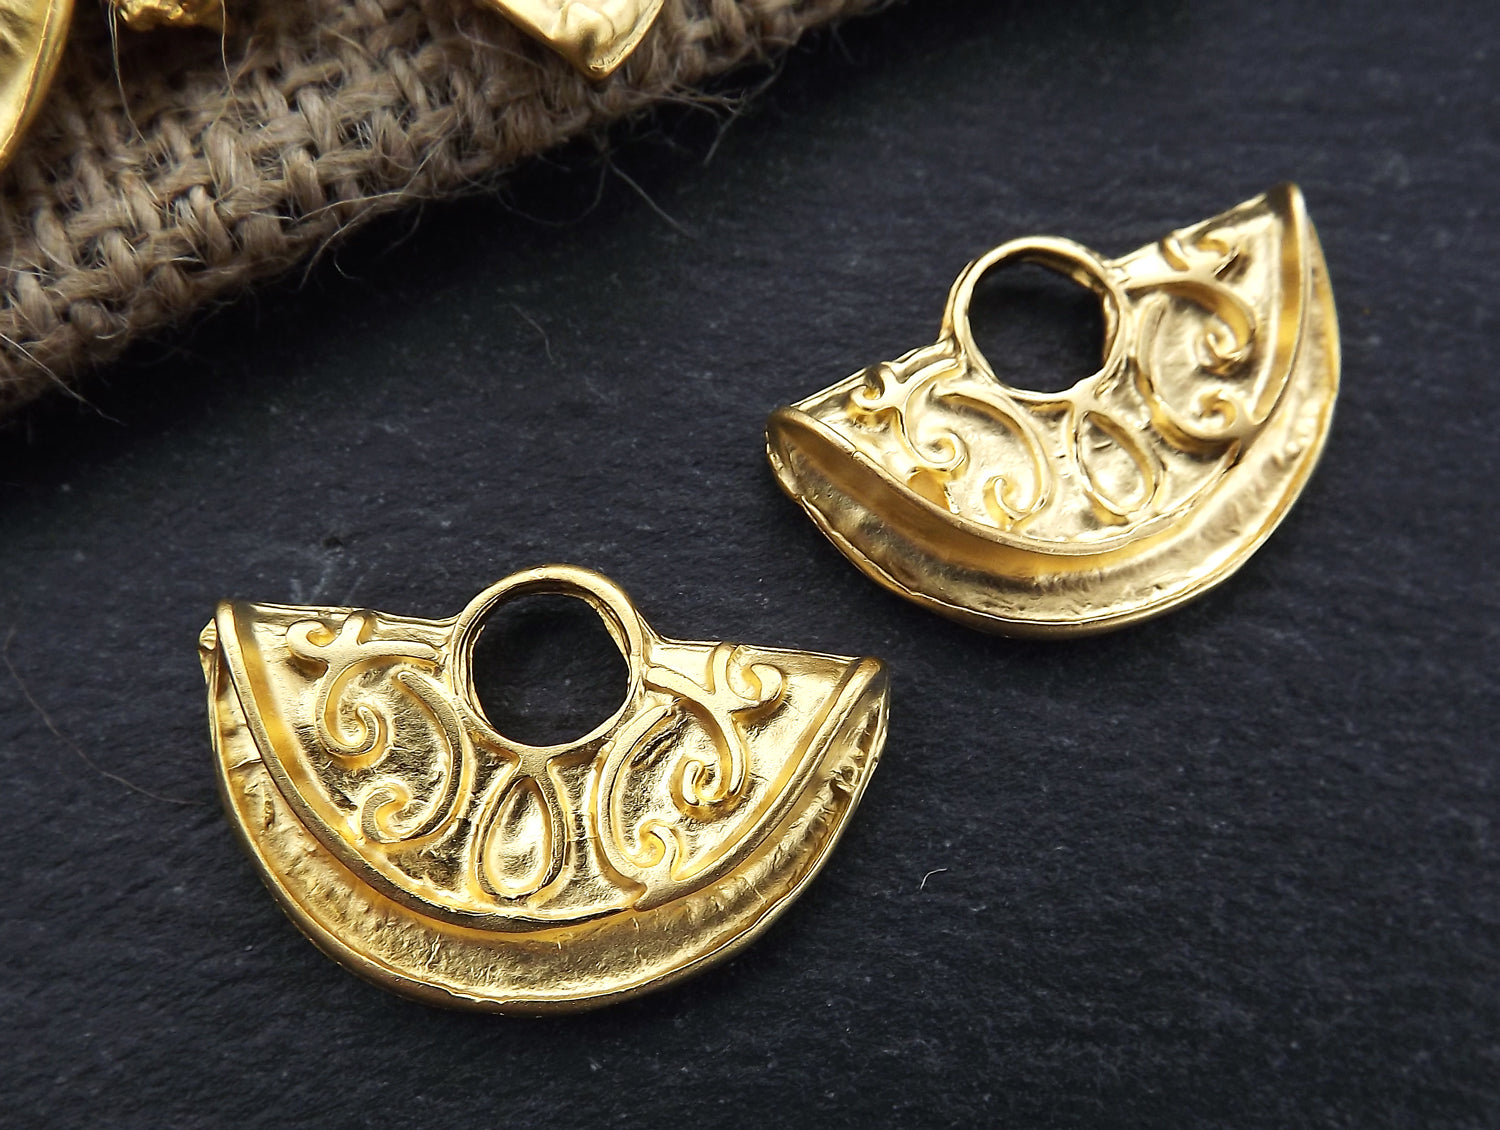 Tribal Ethnic Semi Circle Pendant Charms with Large Loop - 22k Matte Gold Plated - 2pc